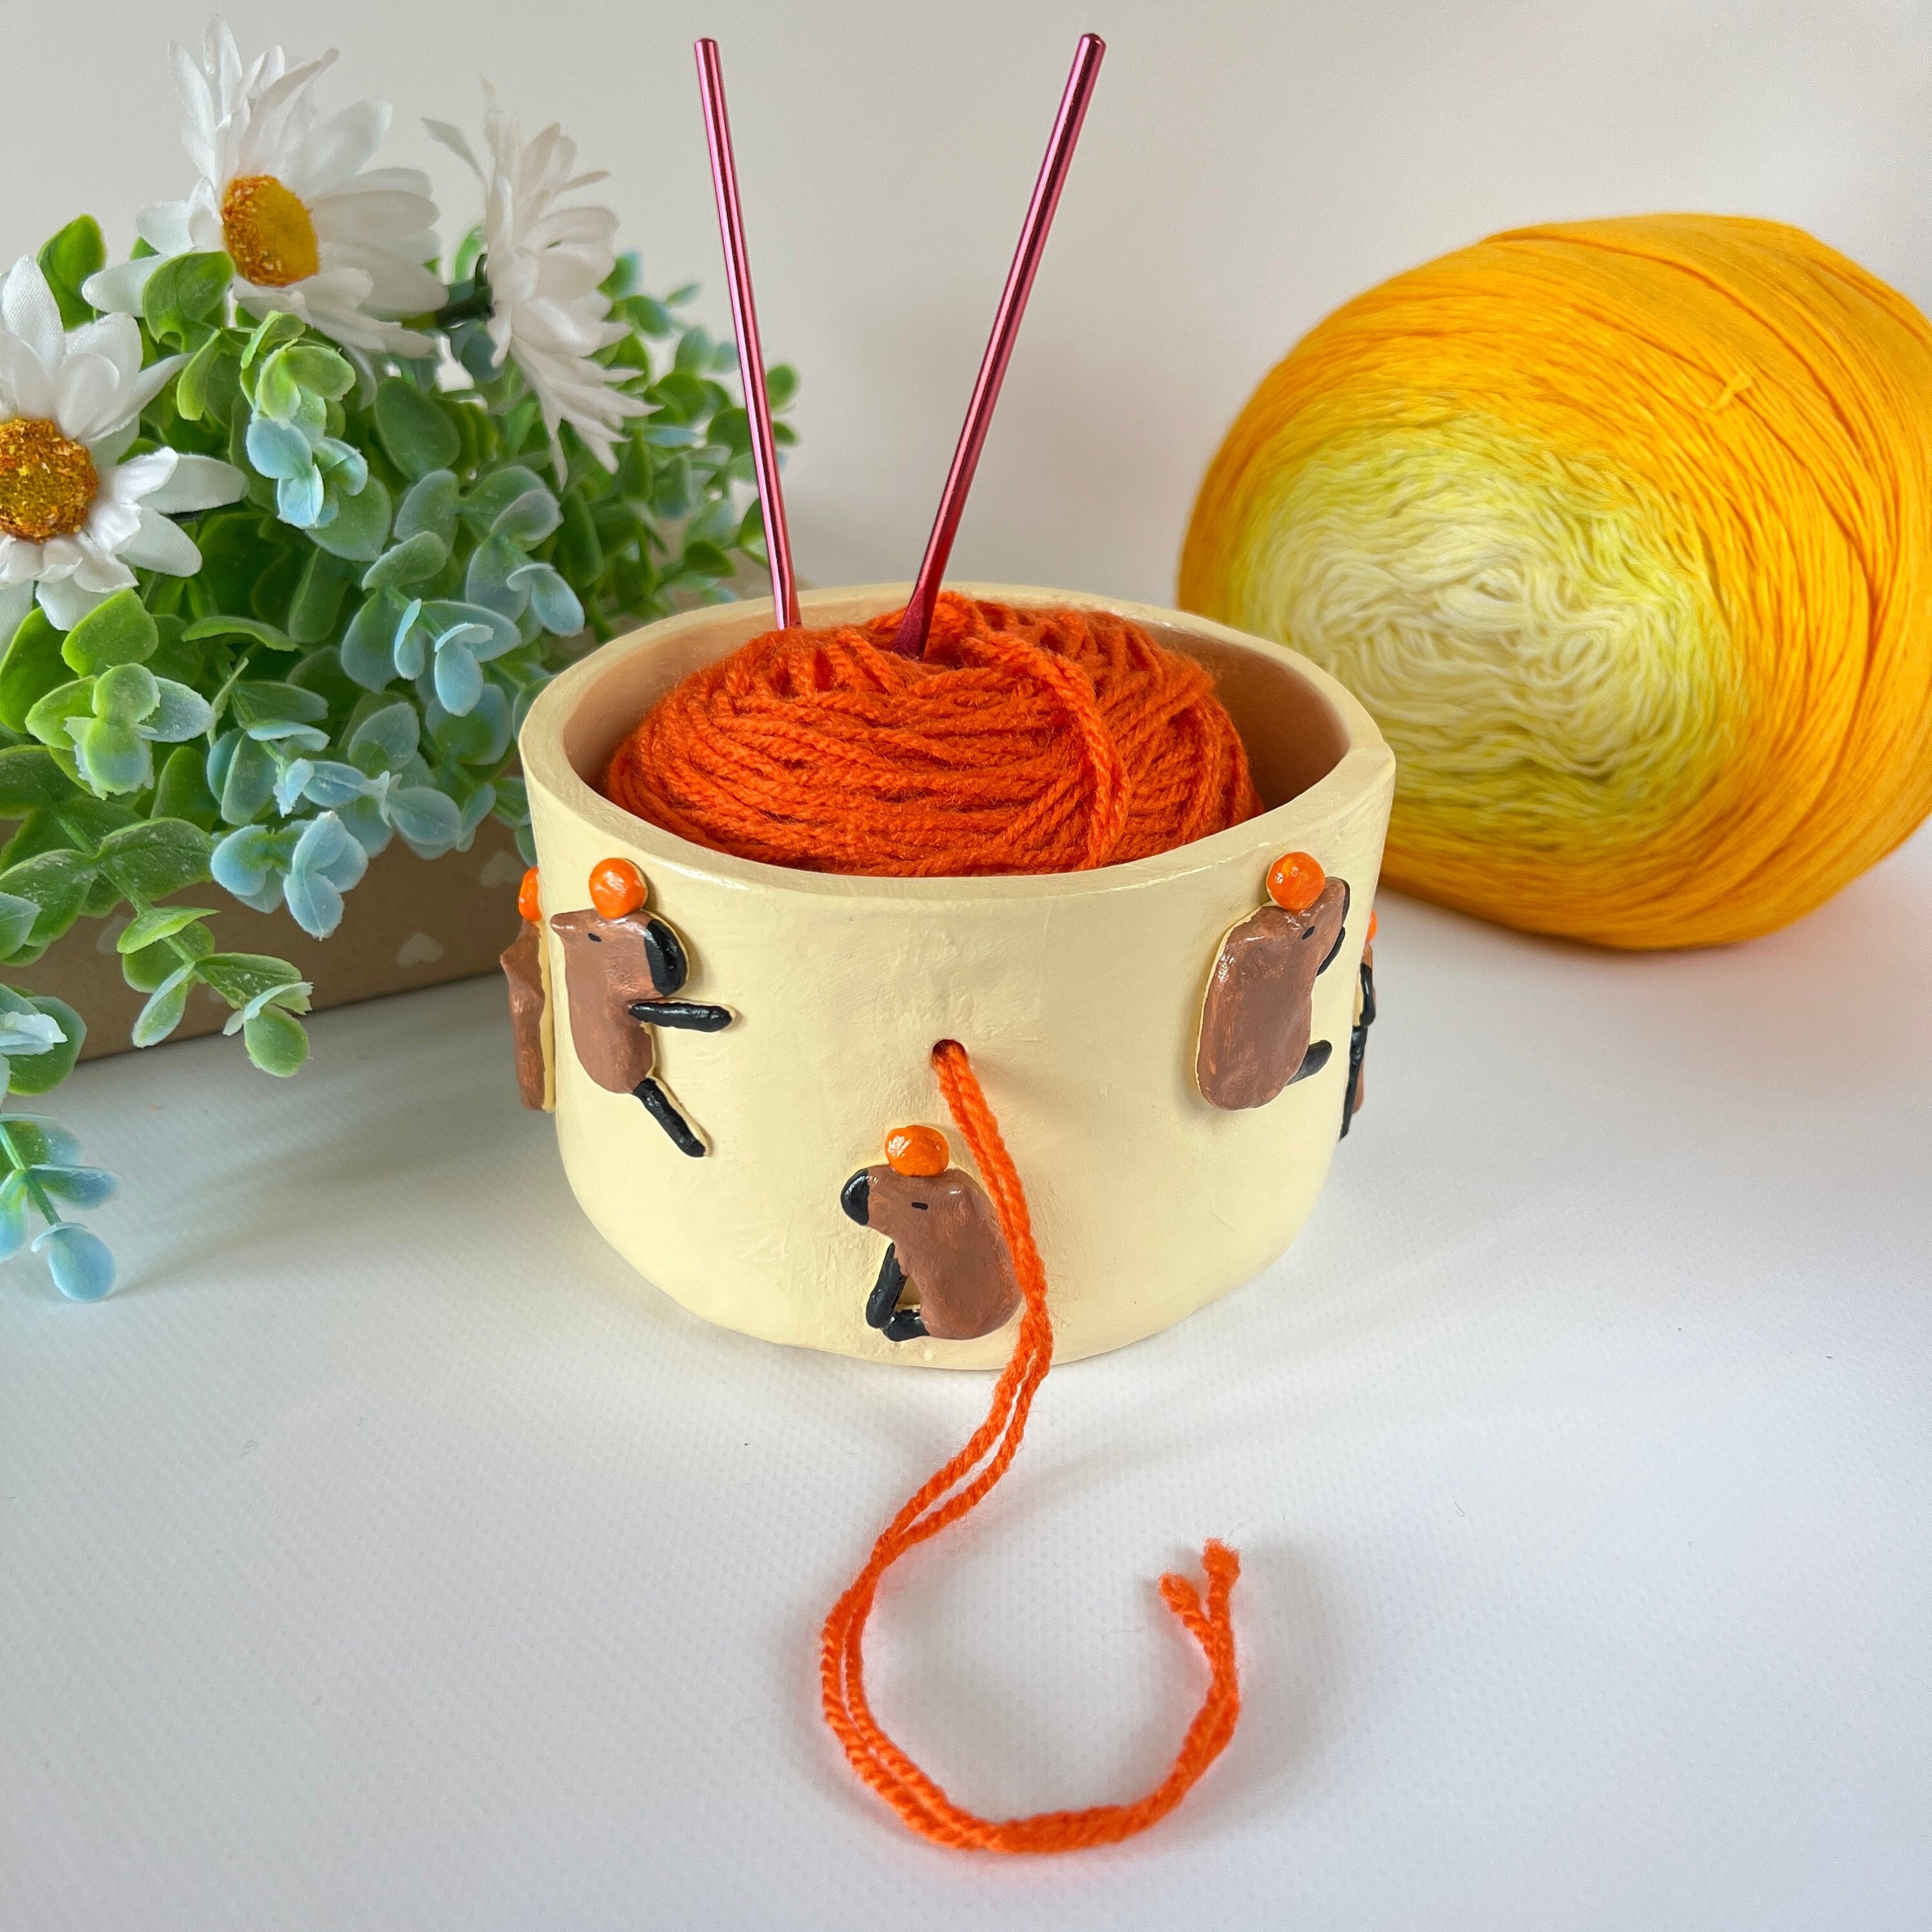 I got the cutest lil' yarn bowl on !!! I'm obsessed!🐭🧀 (Link in  comments) : r/crochet